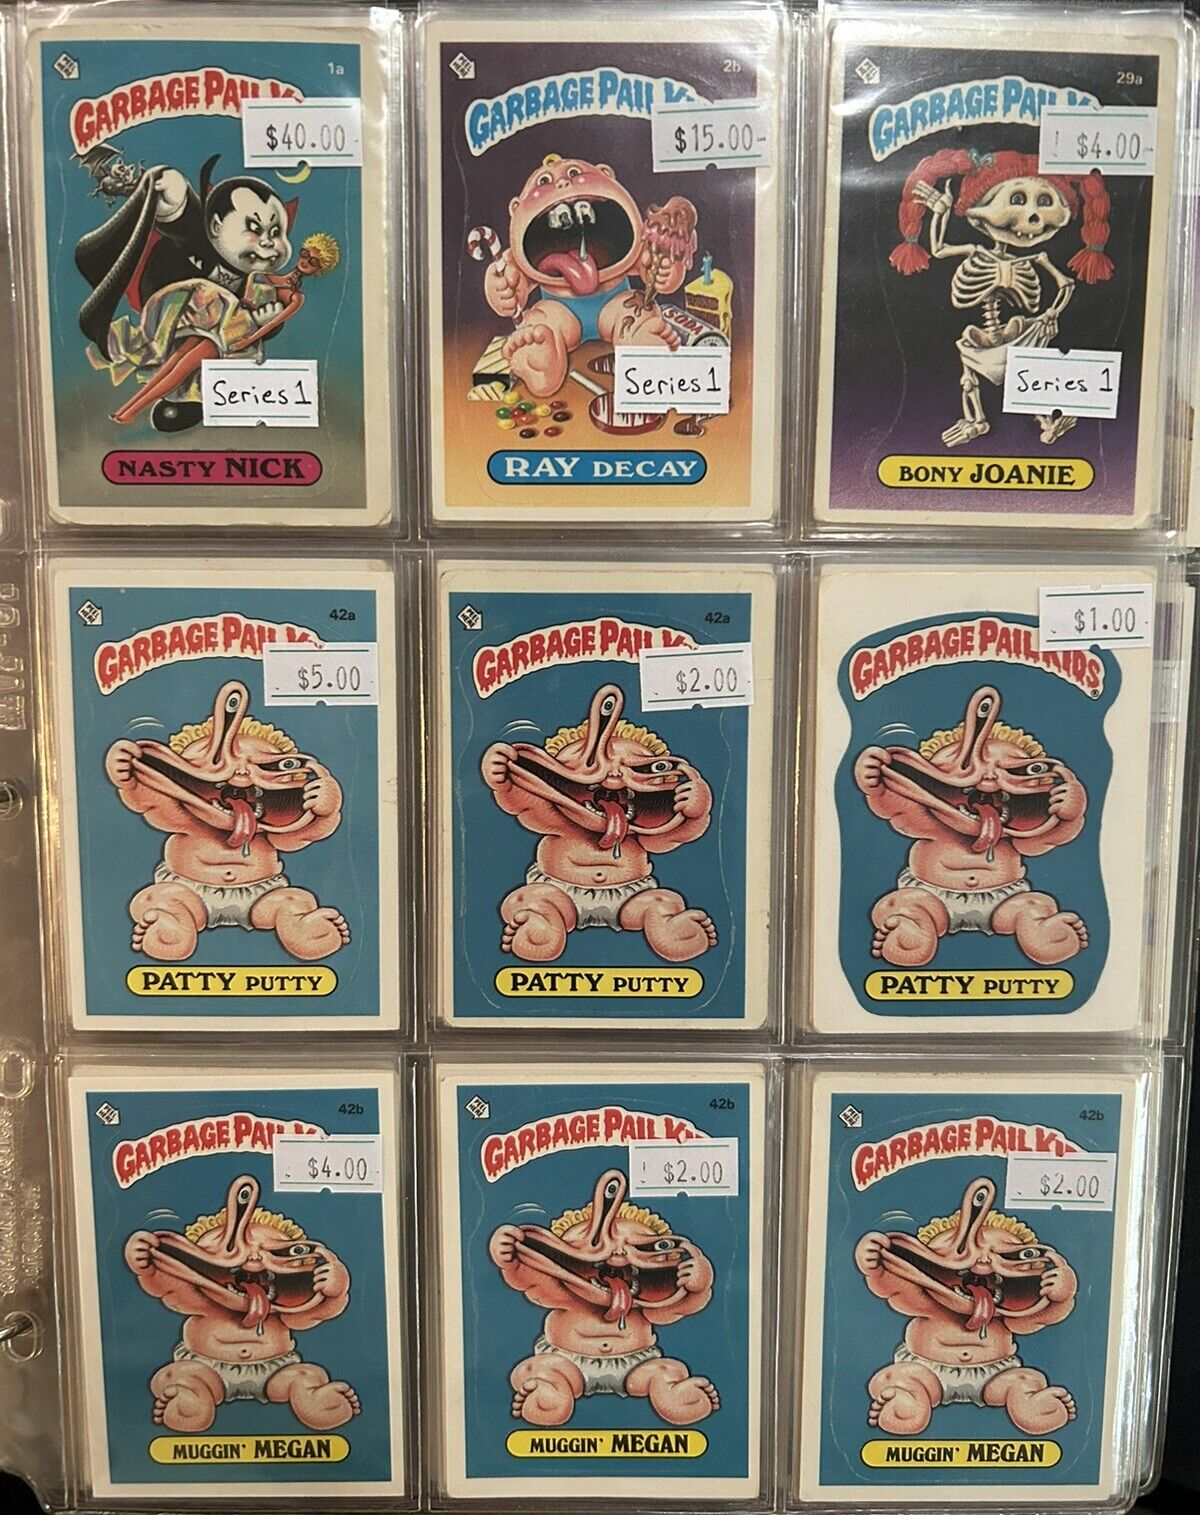 1985 Garbage Pail Kids Series 1-3 Lot (274 Cards) *INCLUDES CARD 1a NASTY NICK*